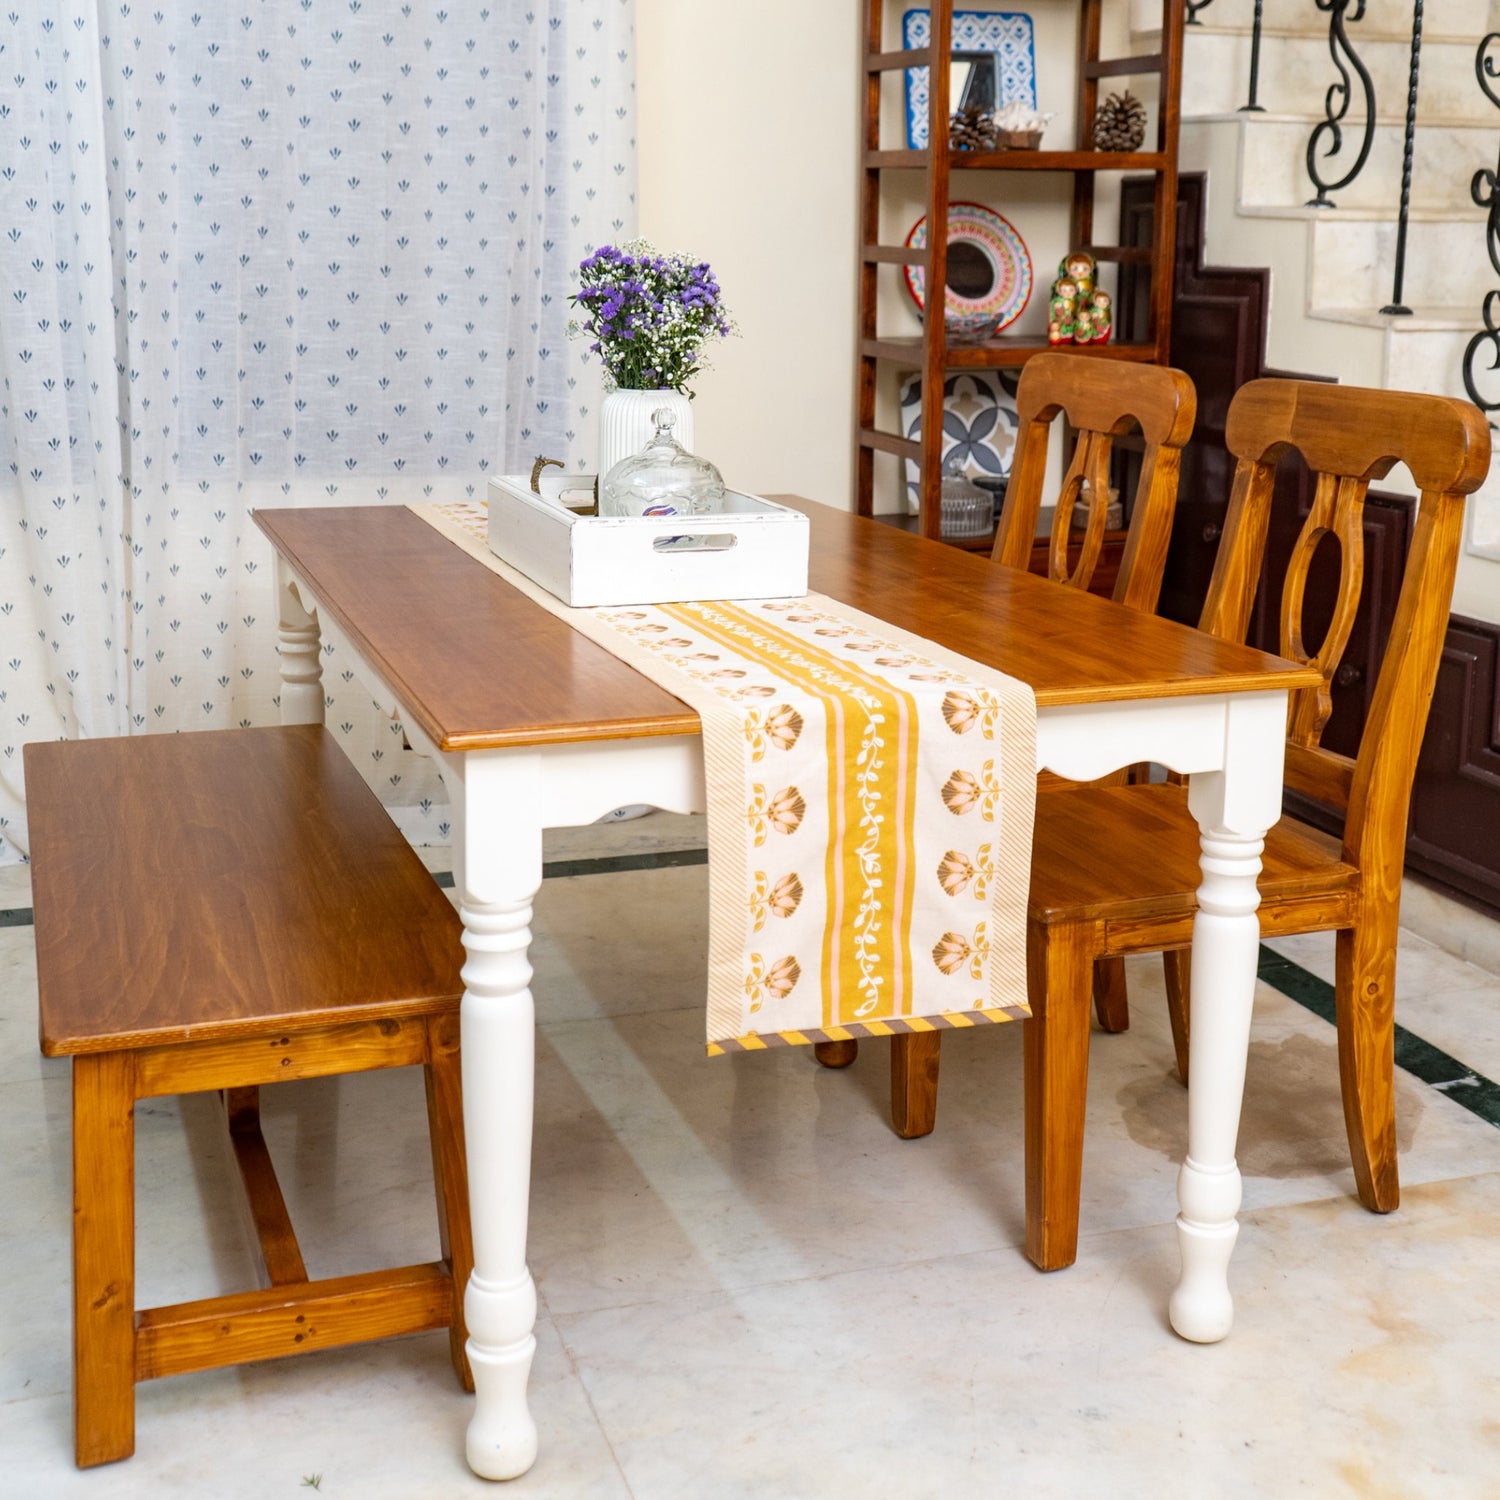 CustHum-dining room collection, wooden dining table and chairs with bench, table top tray 